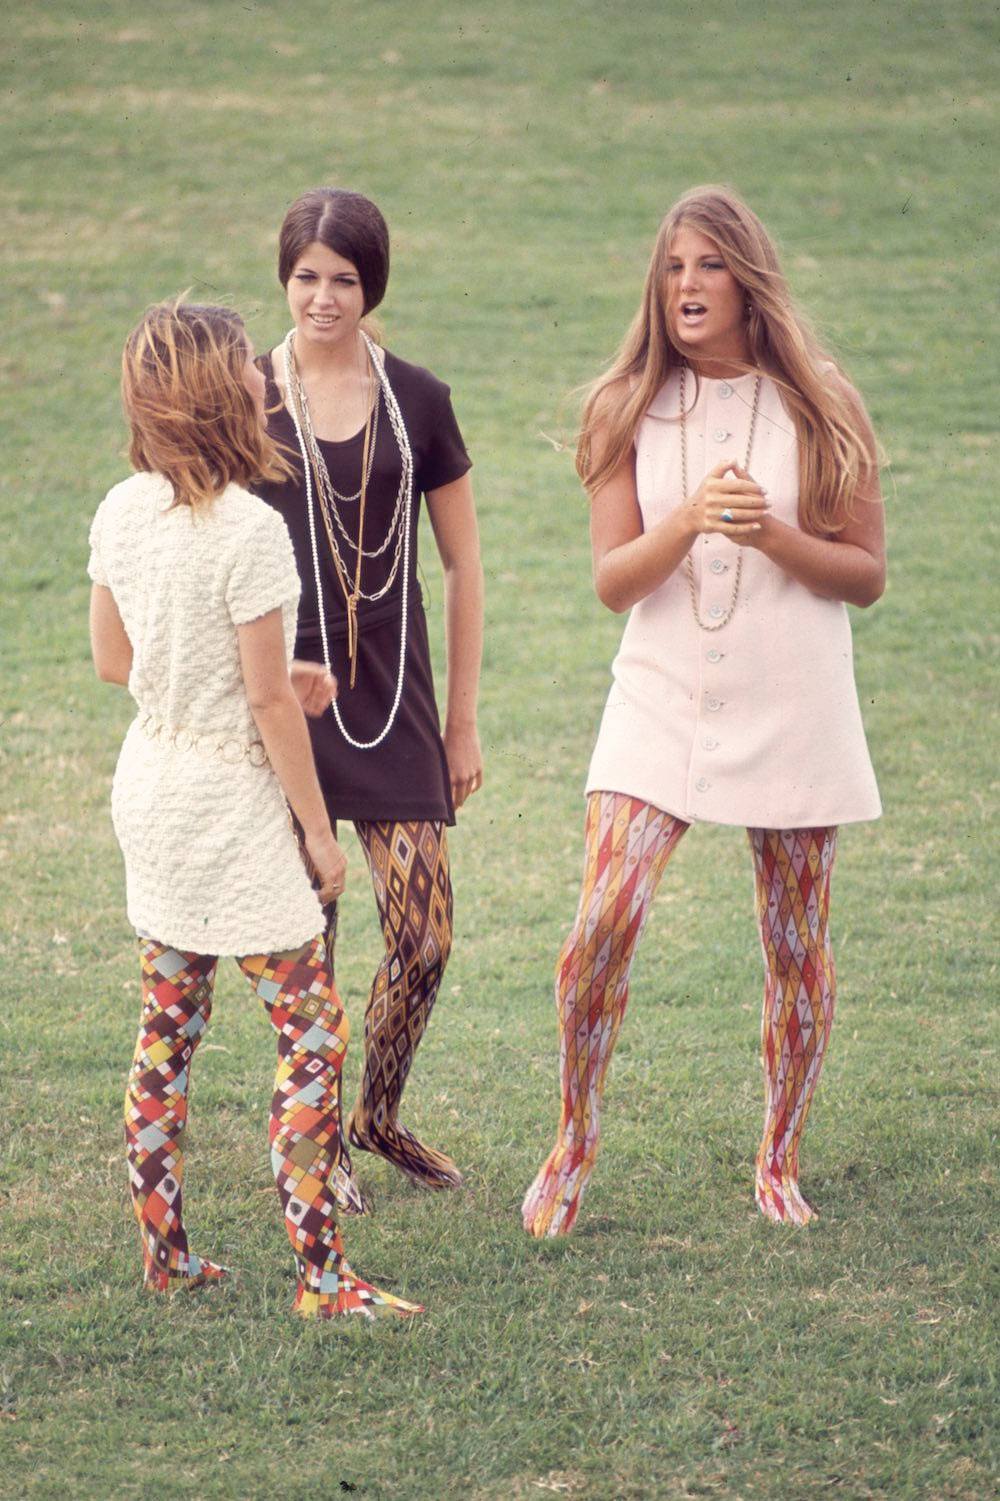 This is What American High School Students Dressed Like in 1969